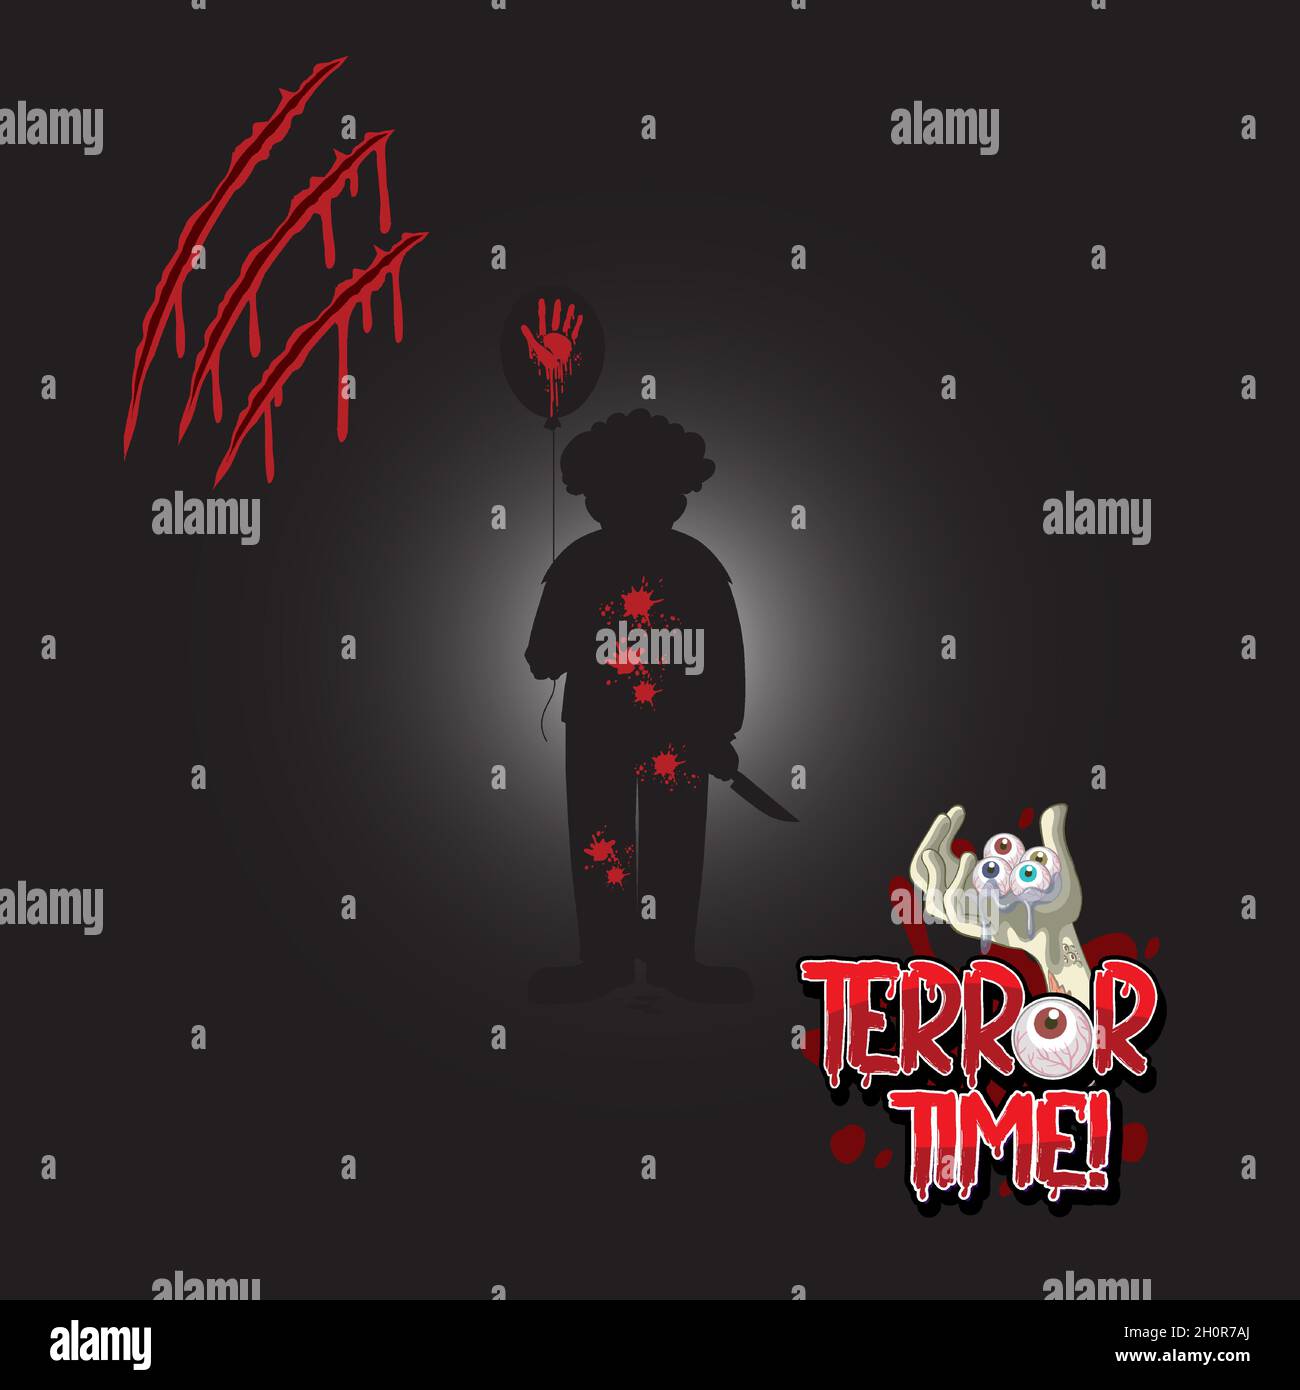 Terror Time logo with creepy clown silhouette illustration Stock Vector